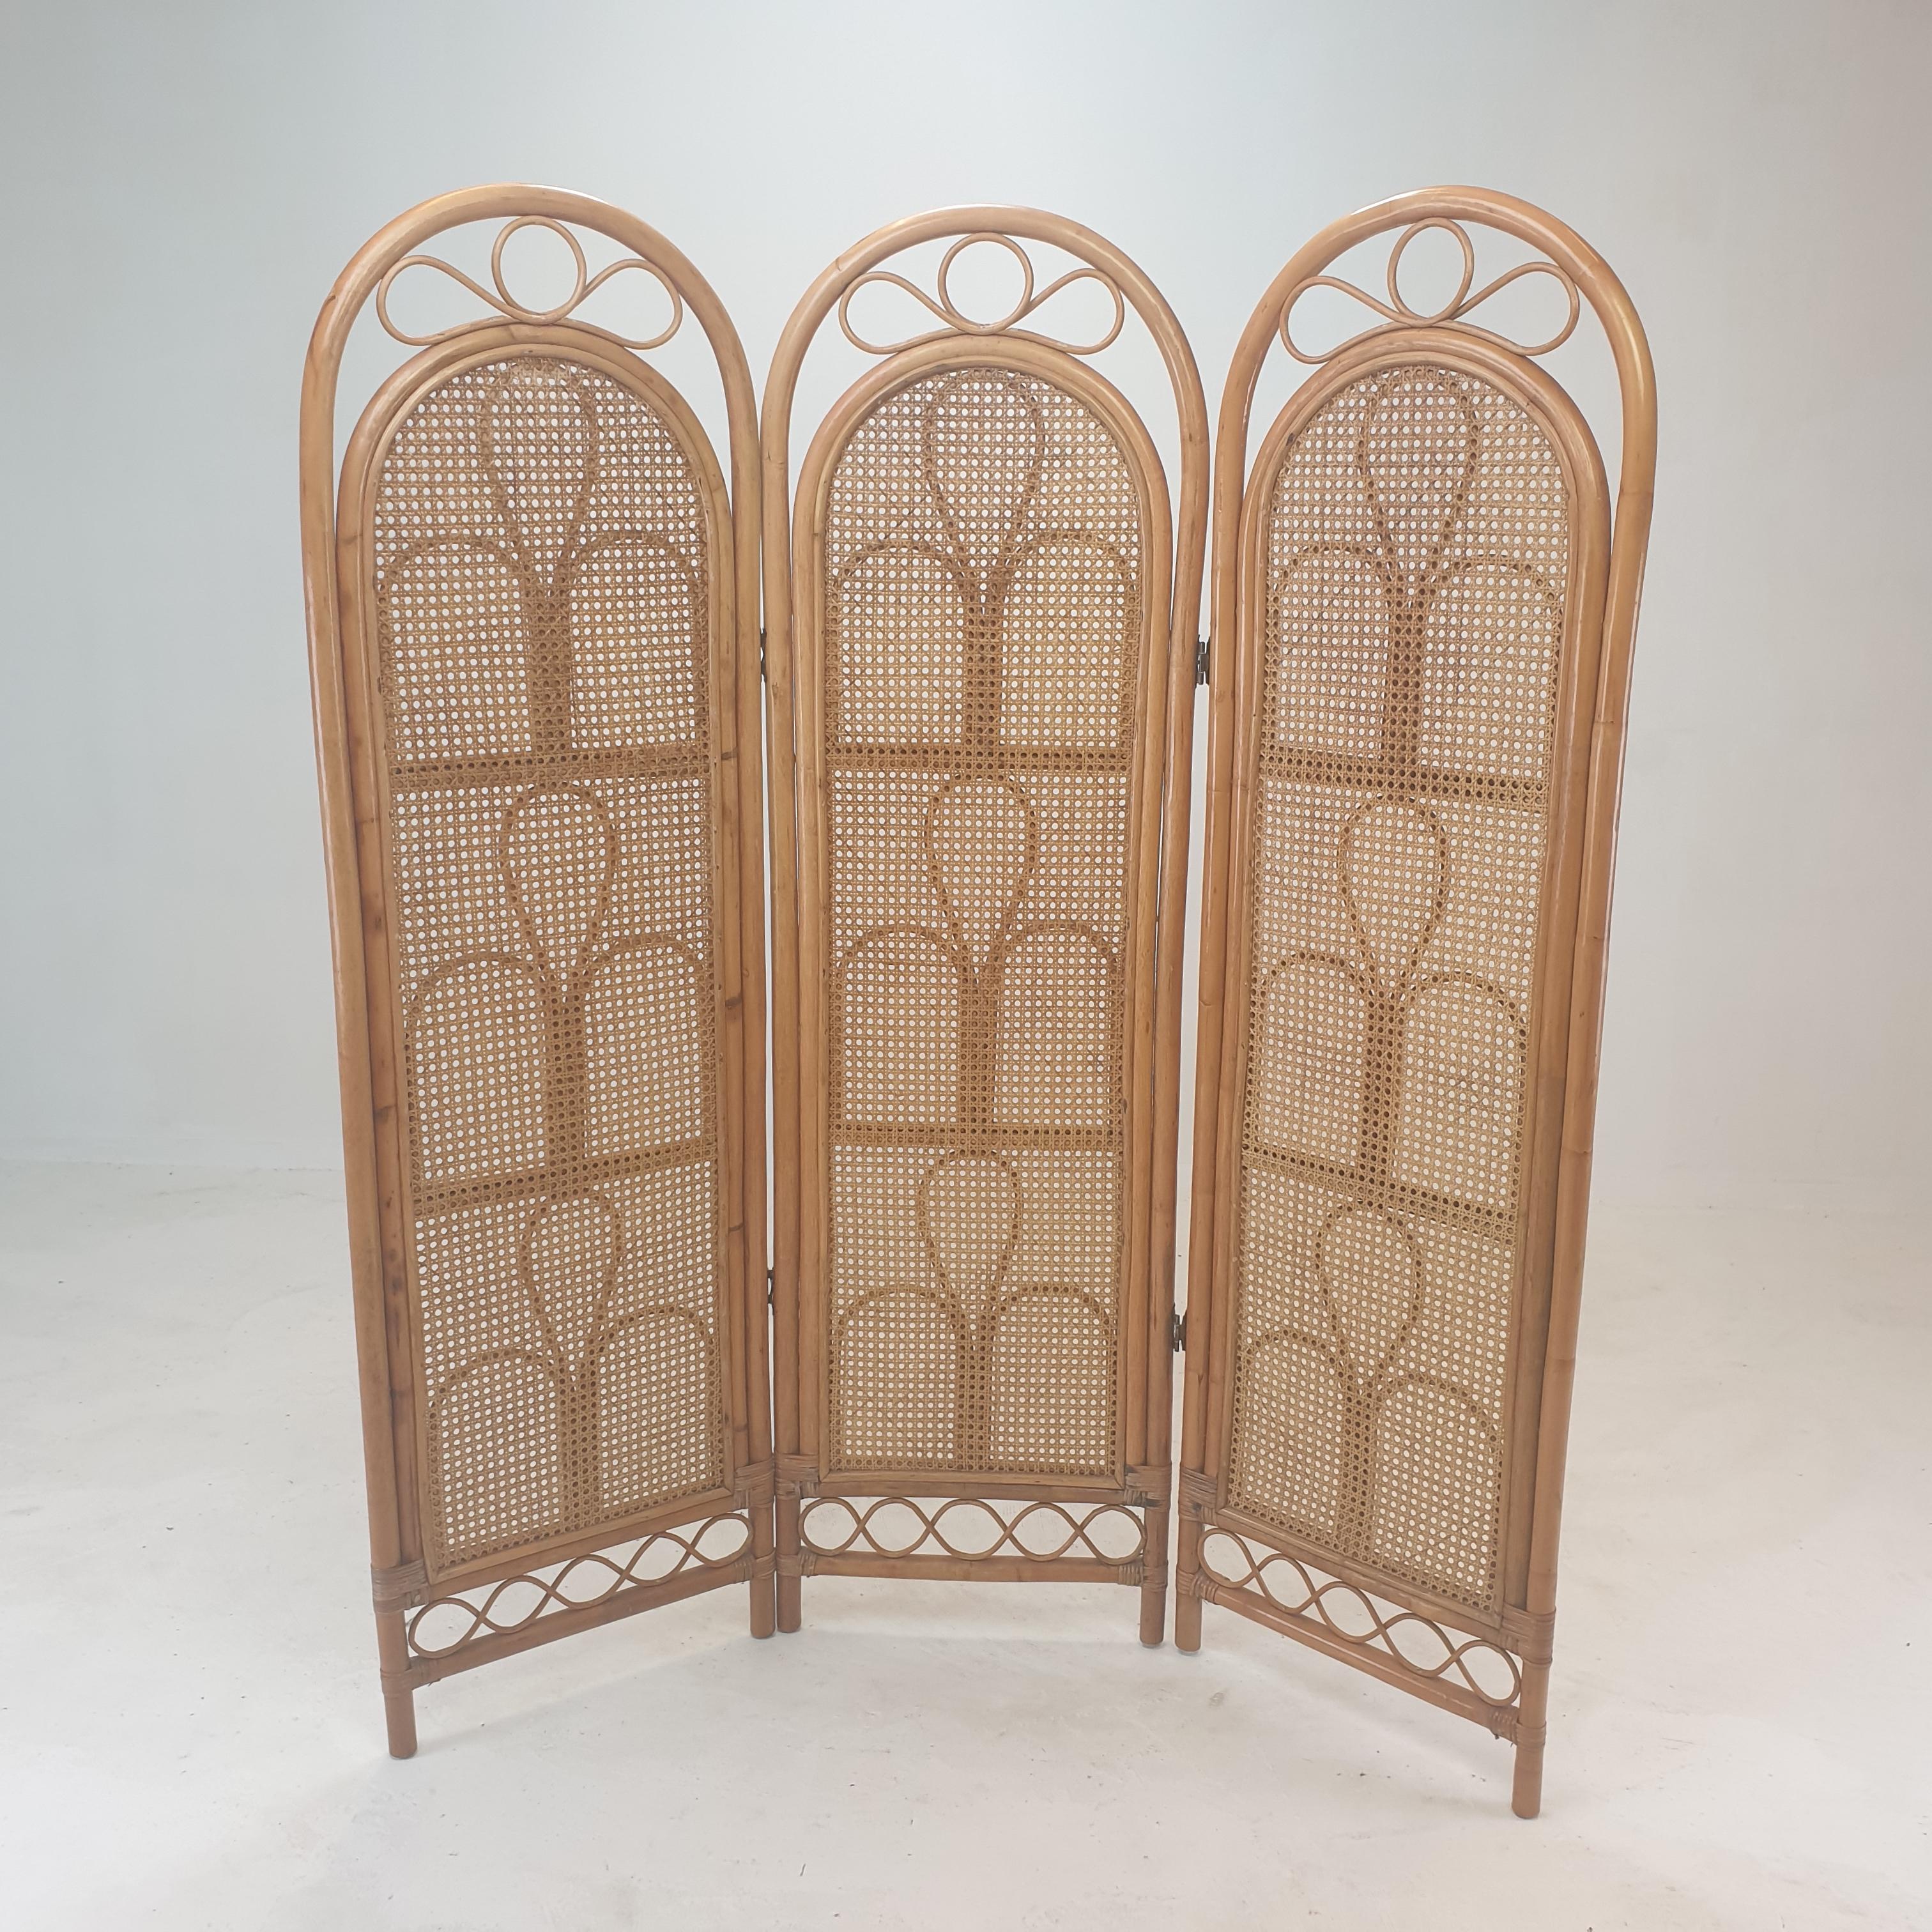 Italian Room Divider in Rattan and Wicker, 1960s For Sale 2